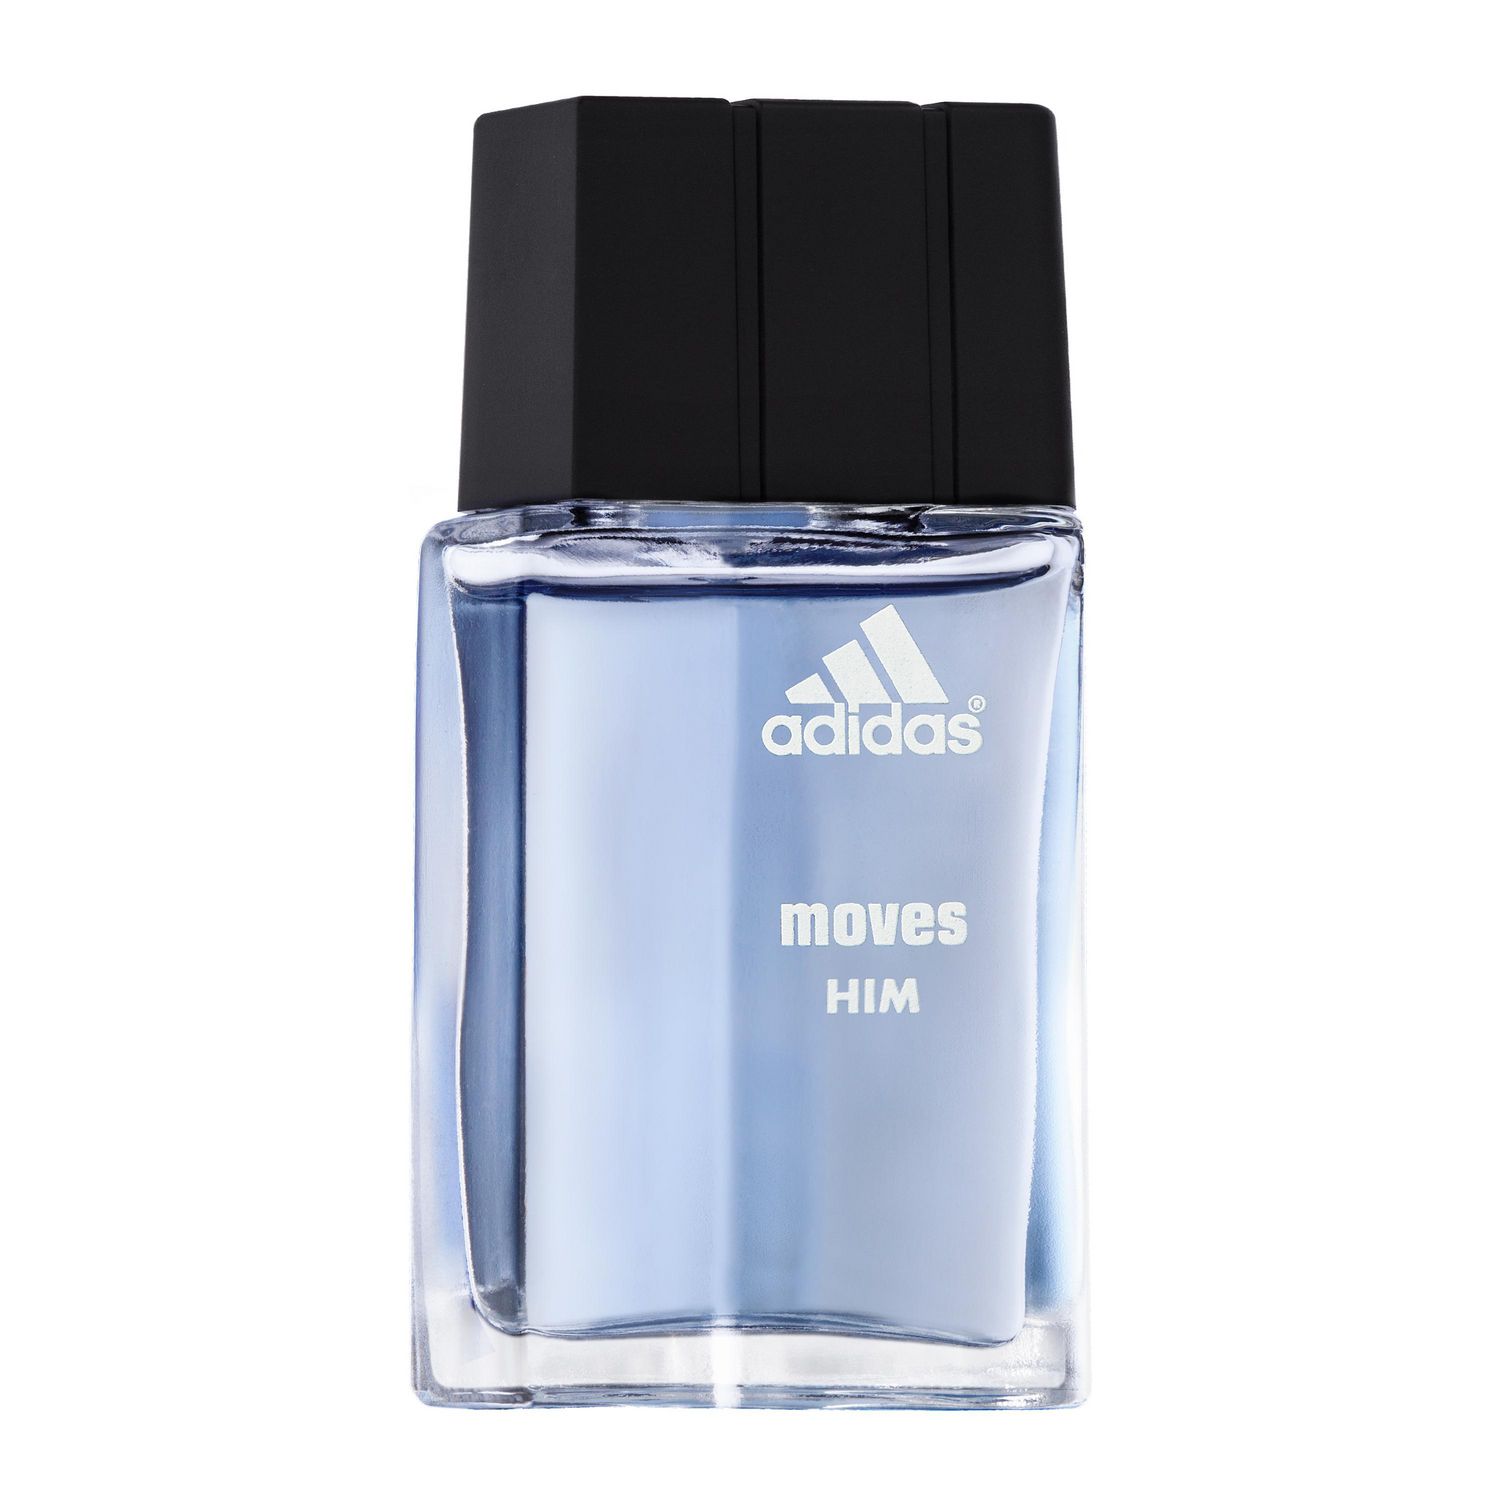 adidas moves men's cologne